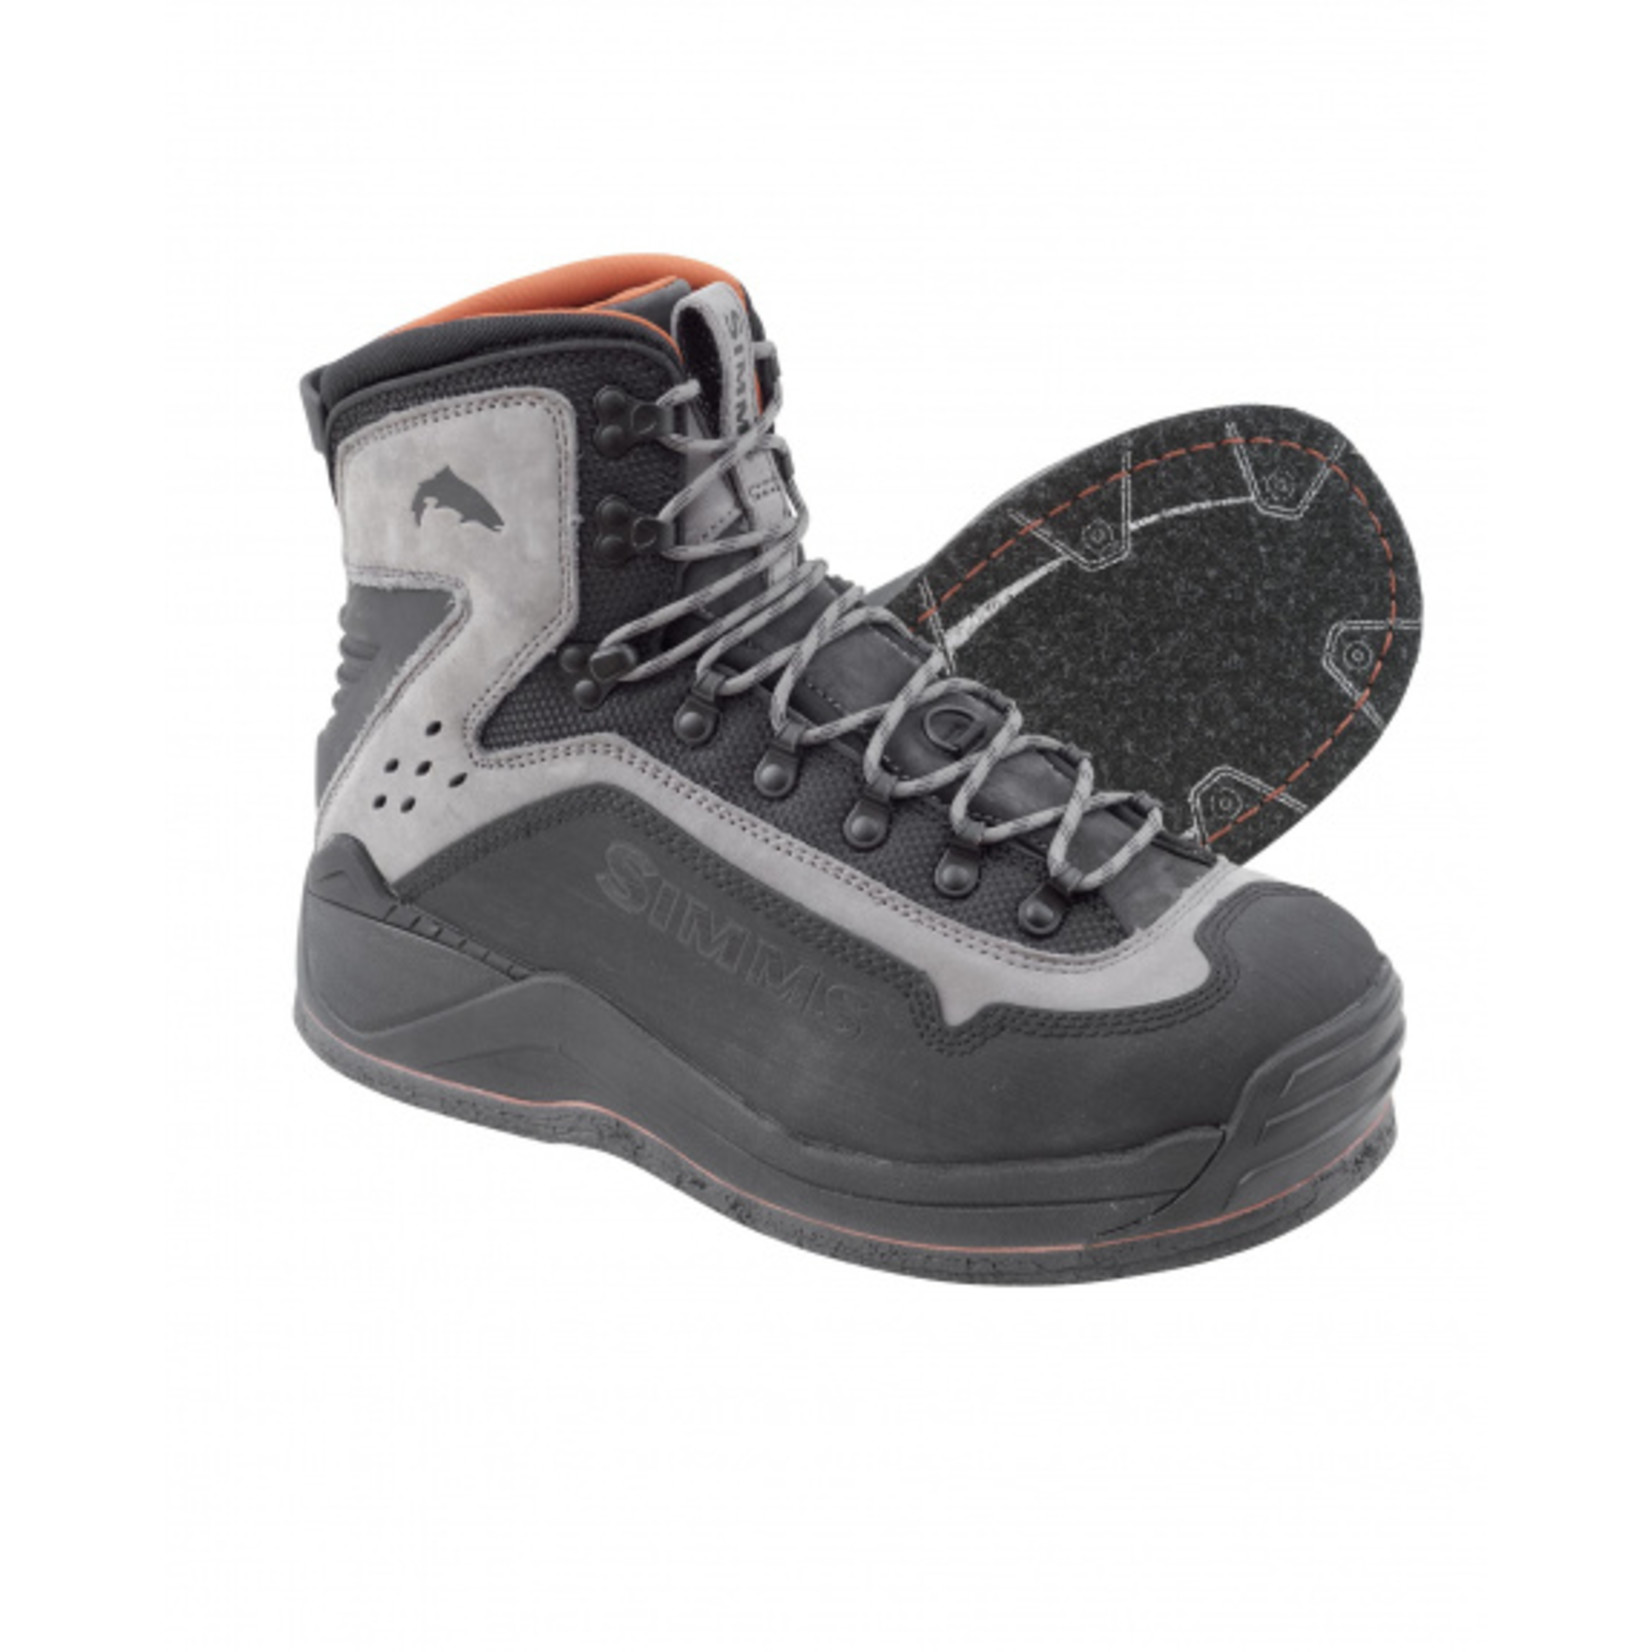 Simms G3 Guide Wading Boots - Felt Soles